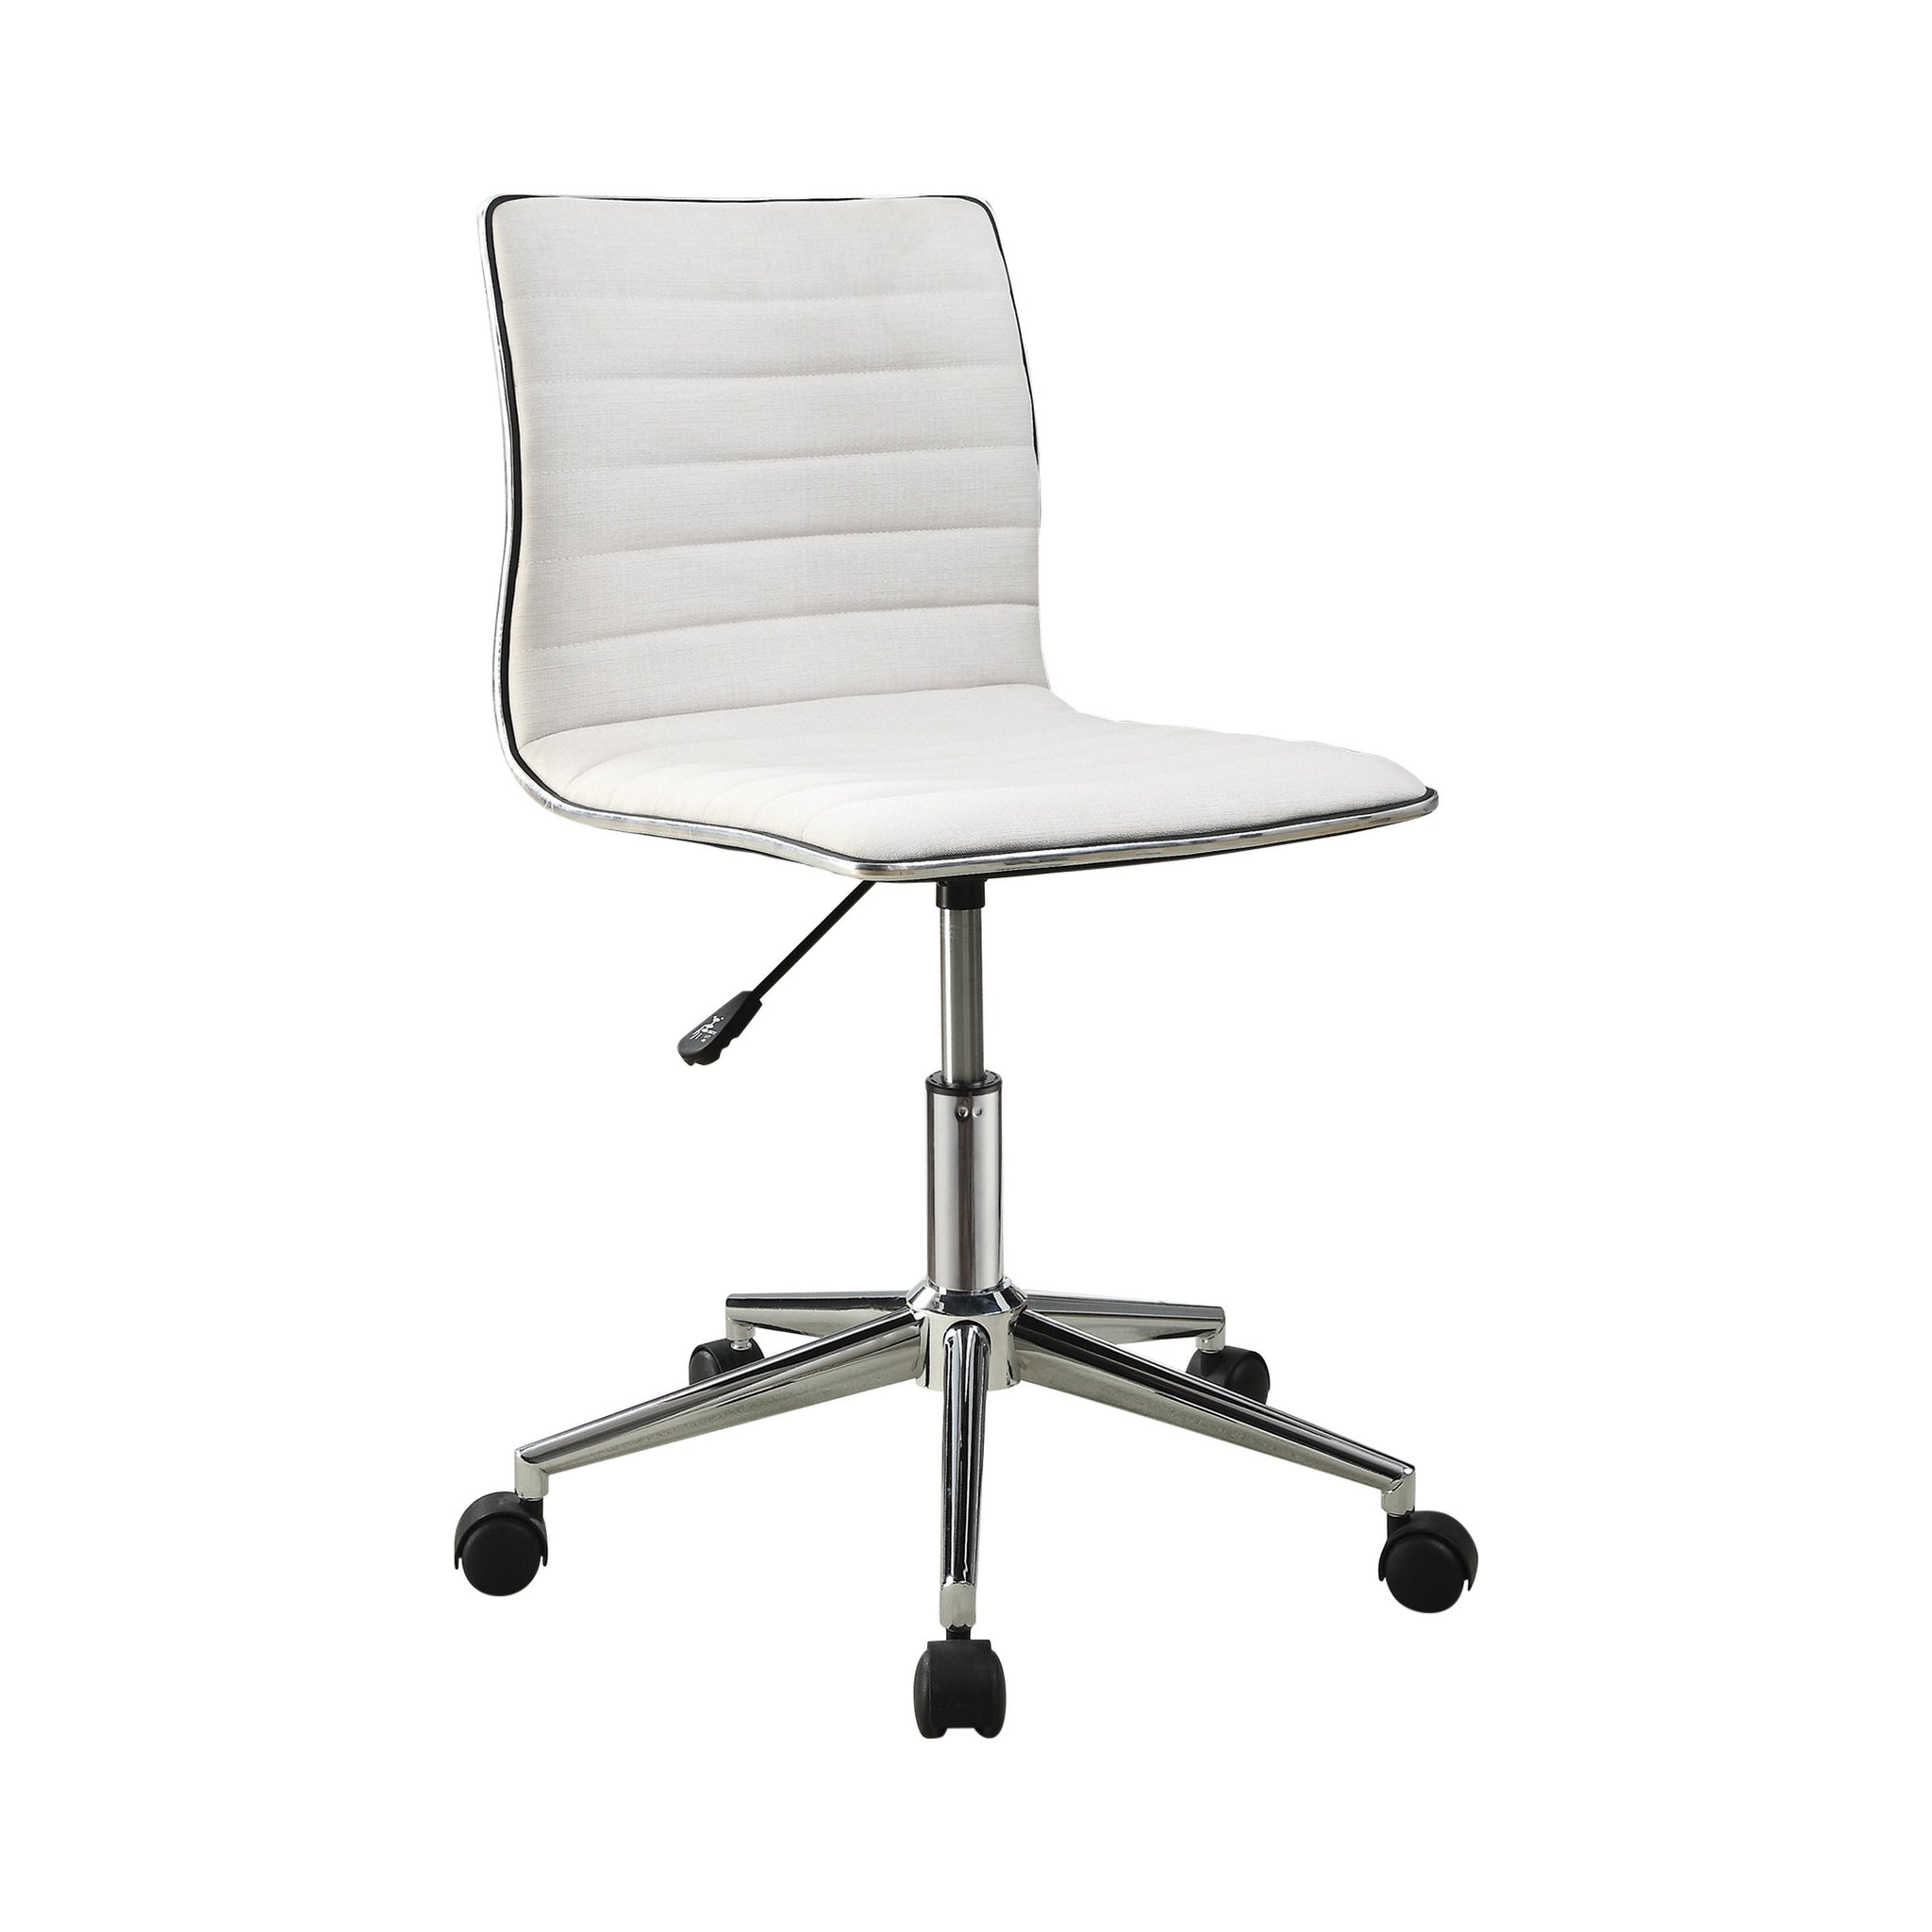 6 Month Rental | White Office Chair | From $30/mo